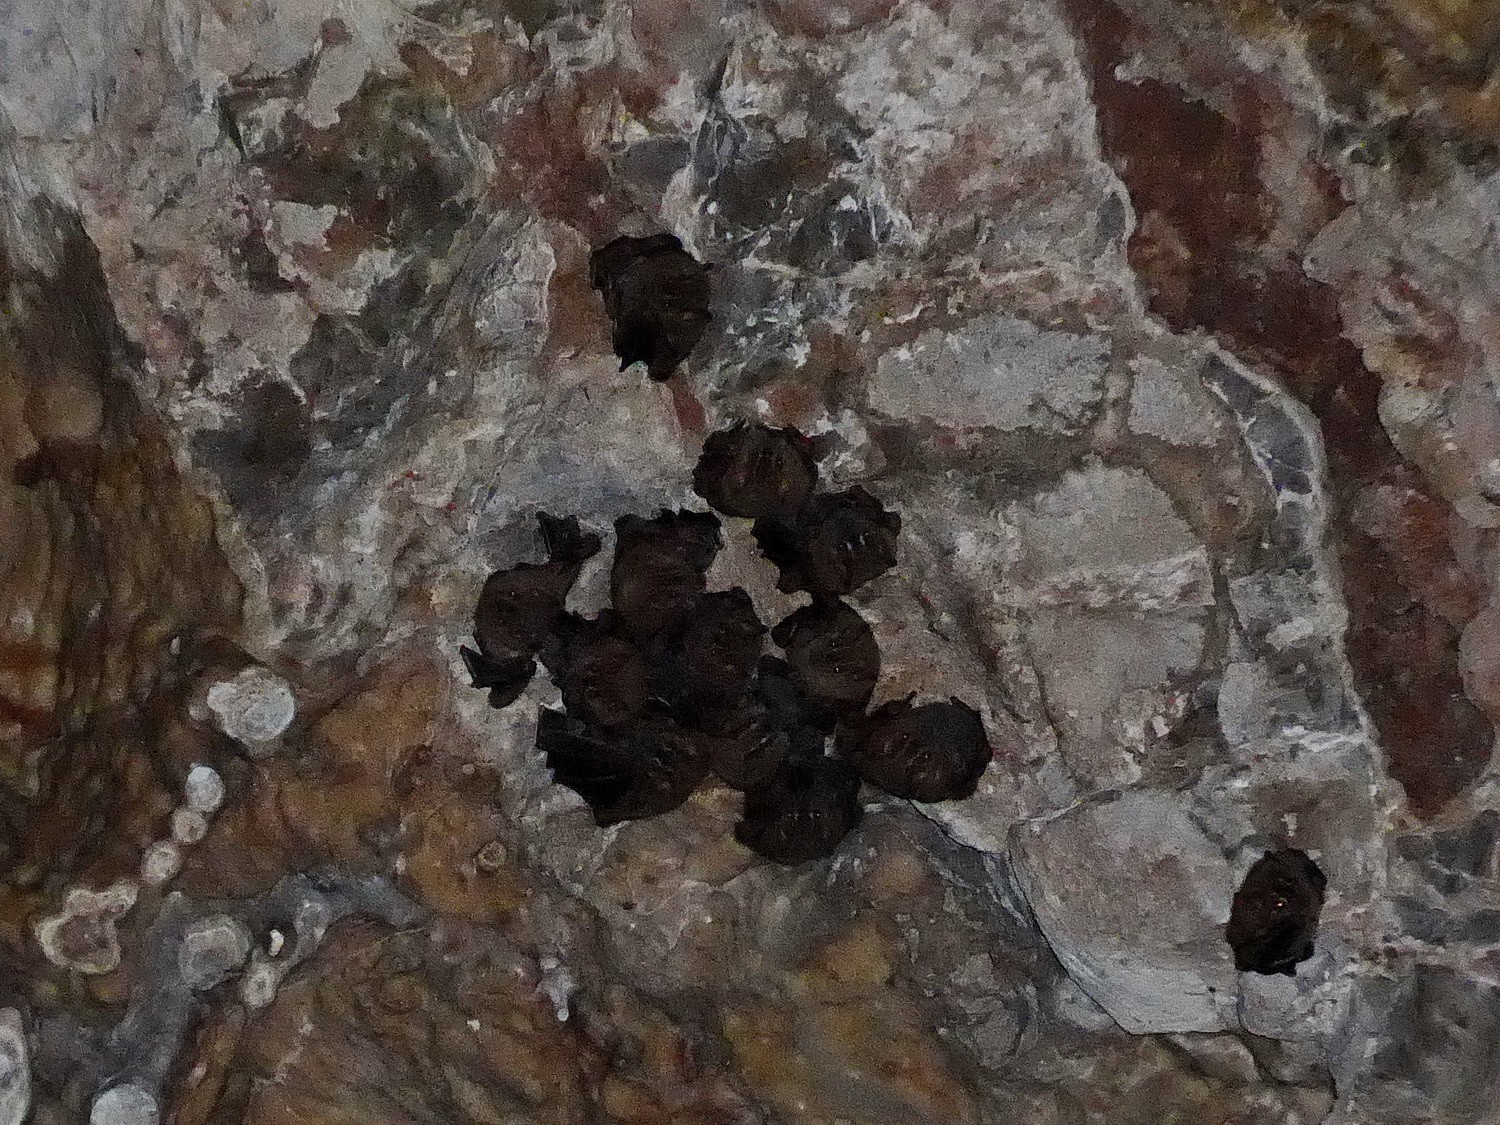 Bats living in the roof of the Cuevas Taulabé